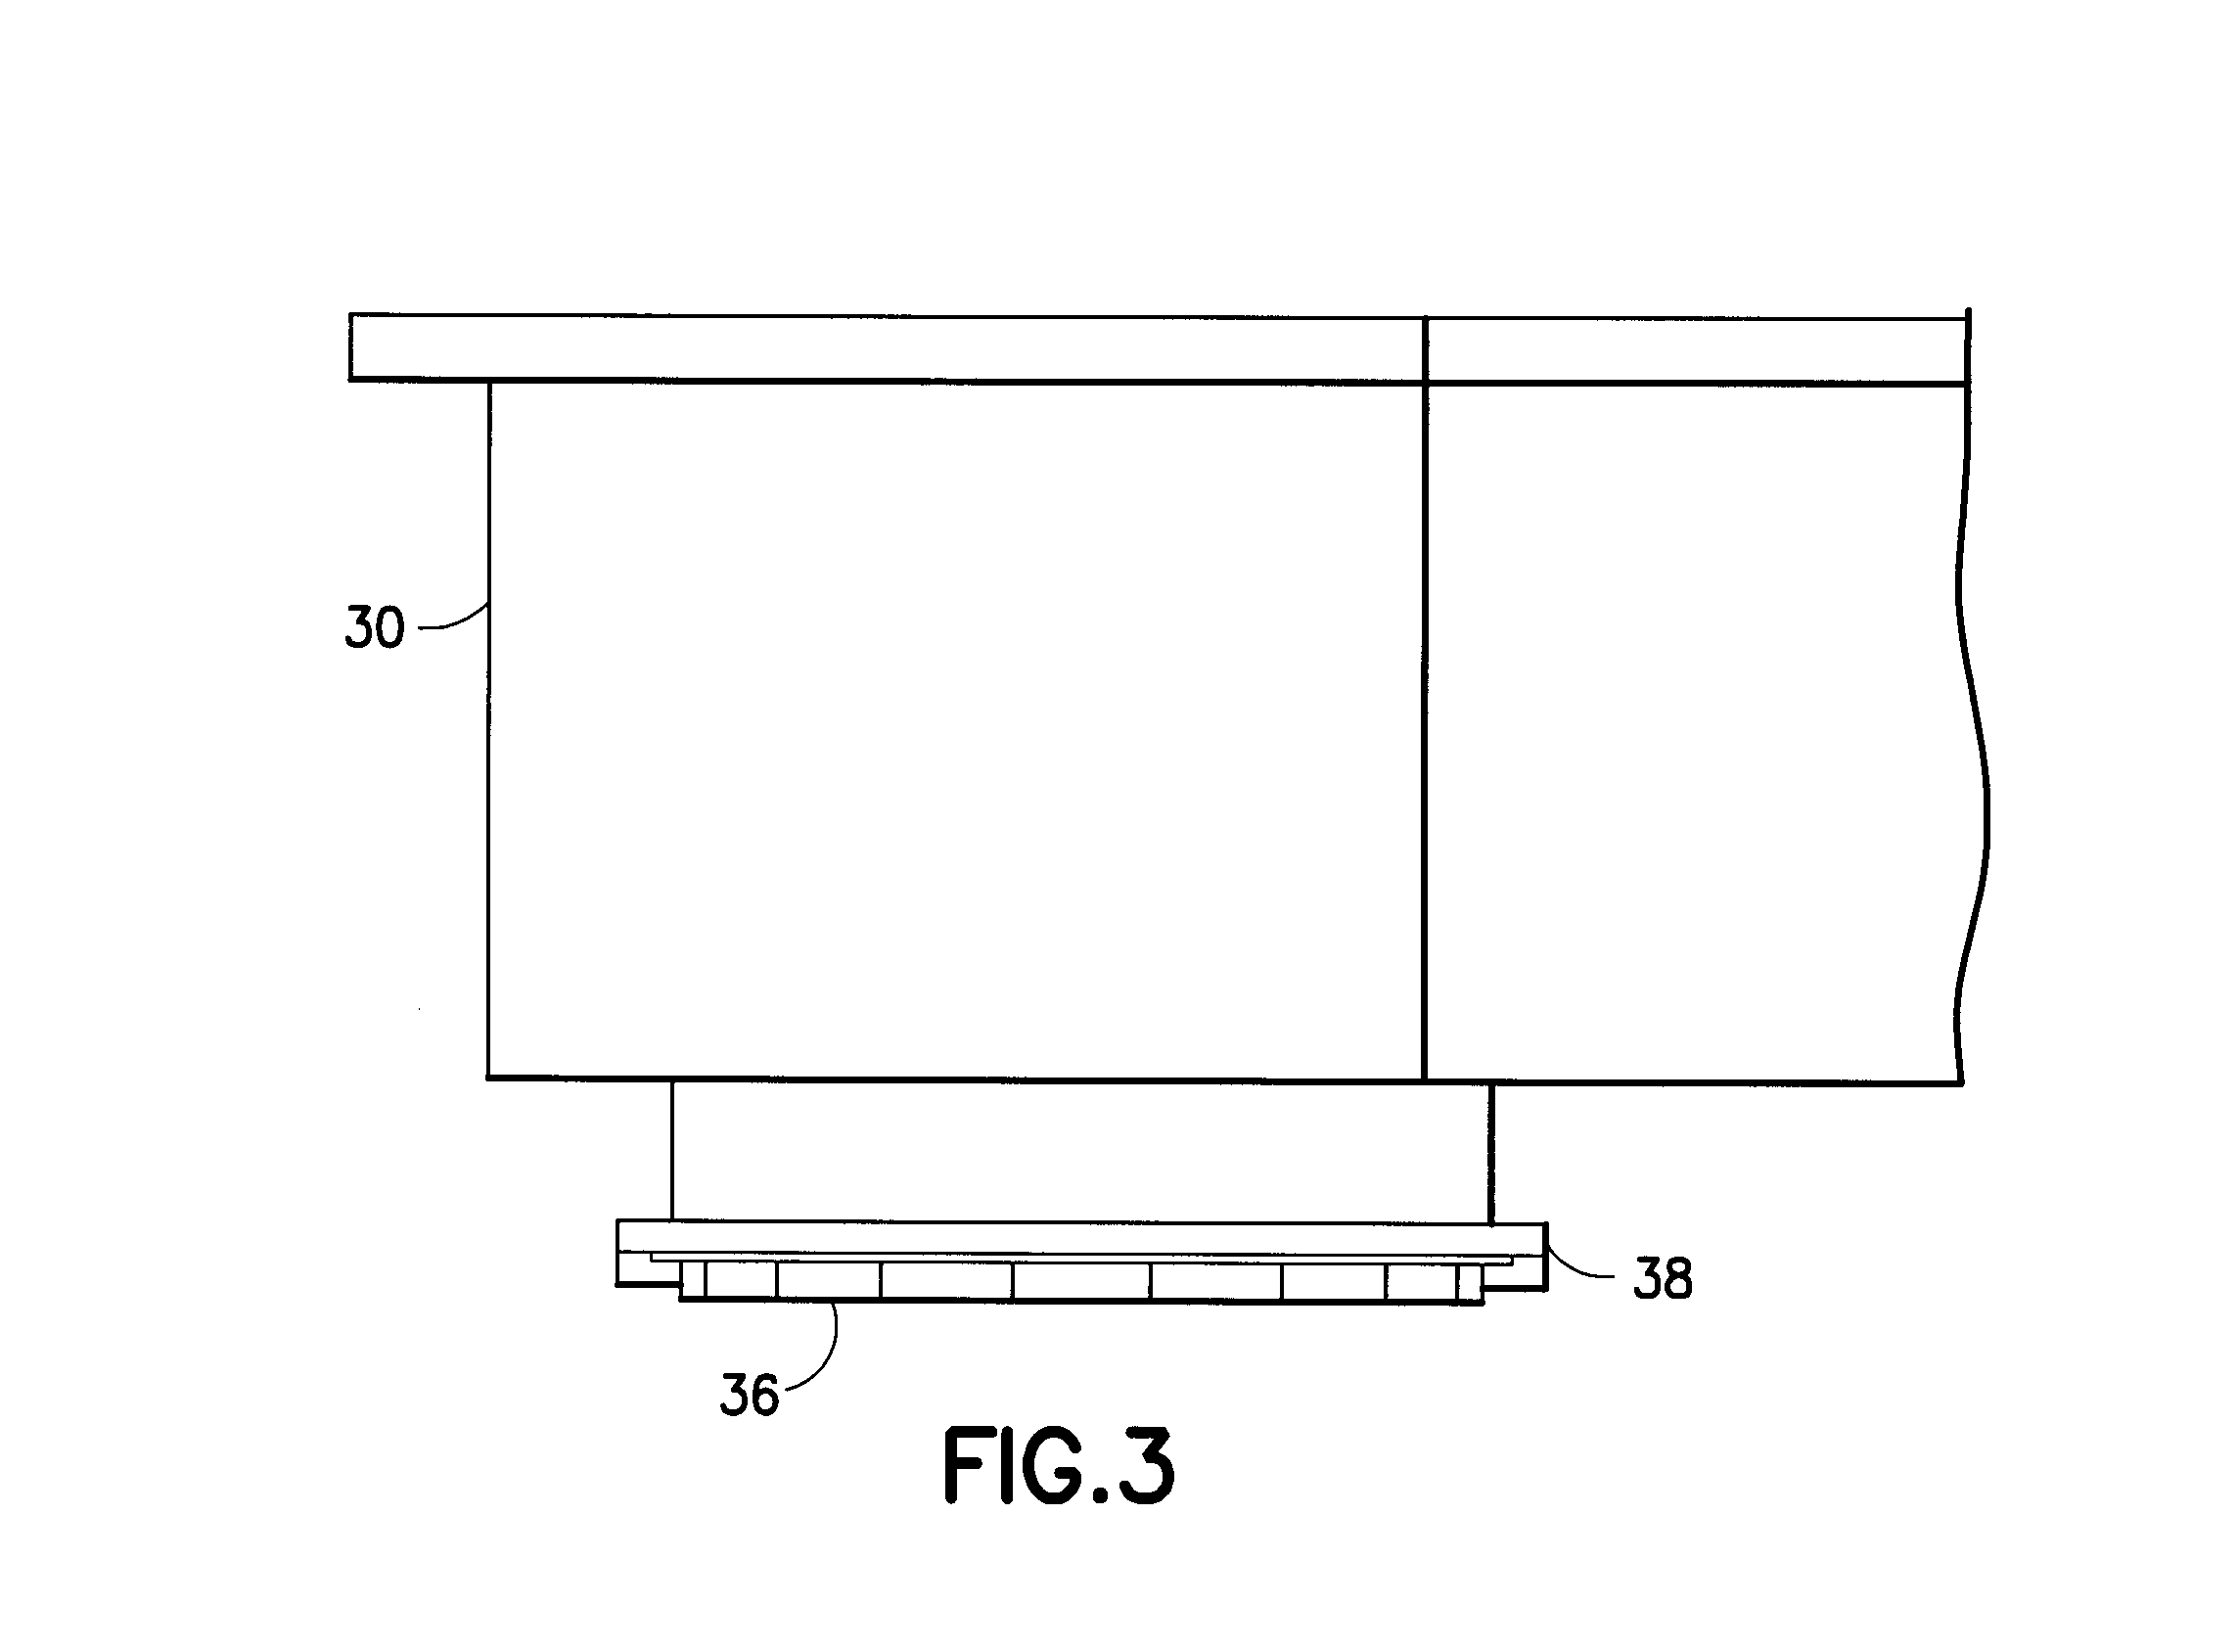 Modular system and methods for moving large heavy objects